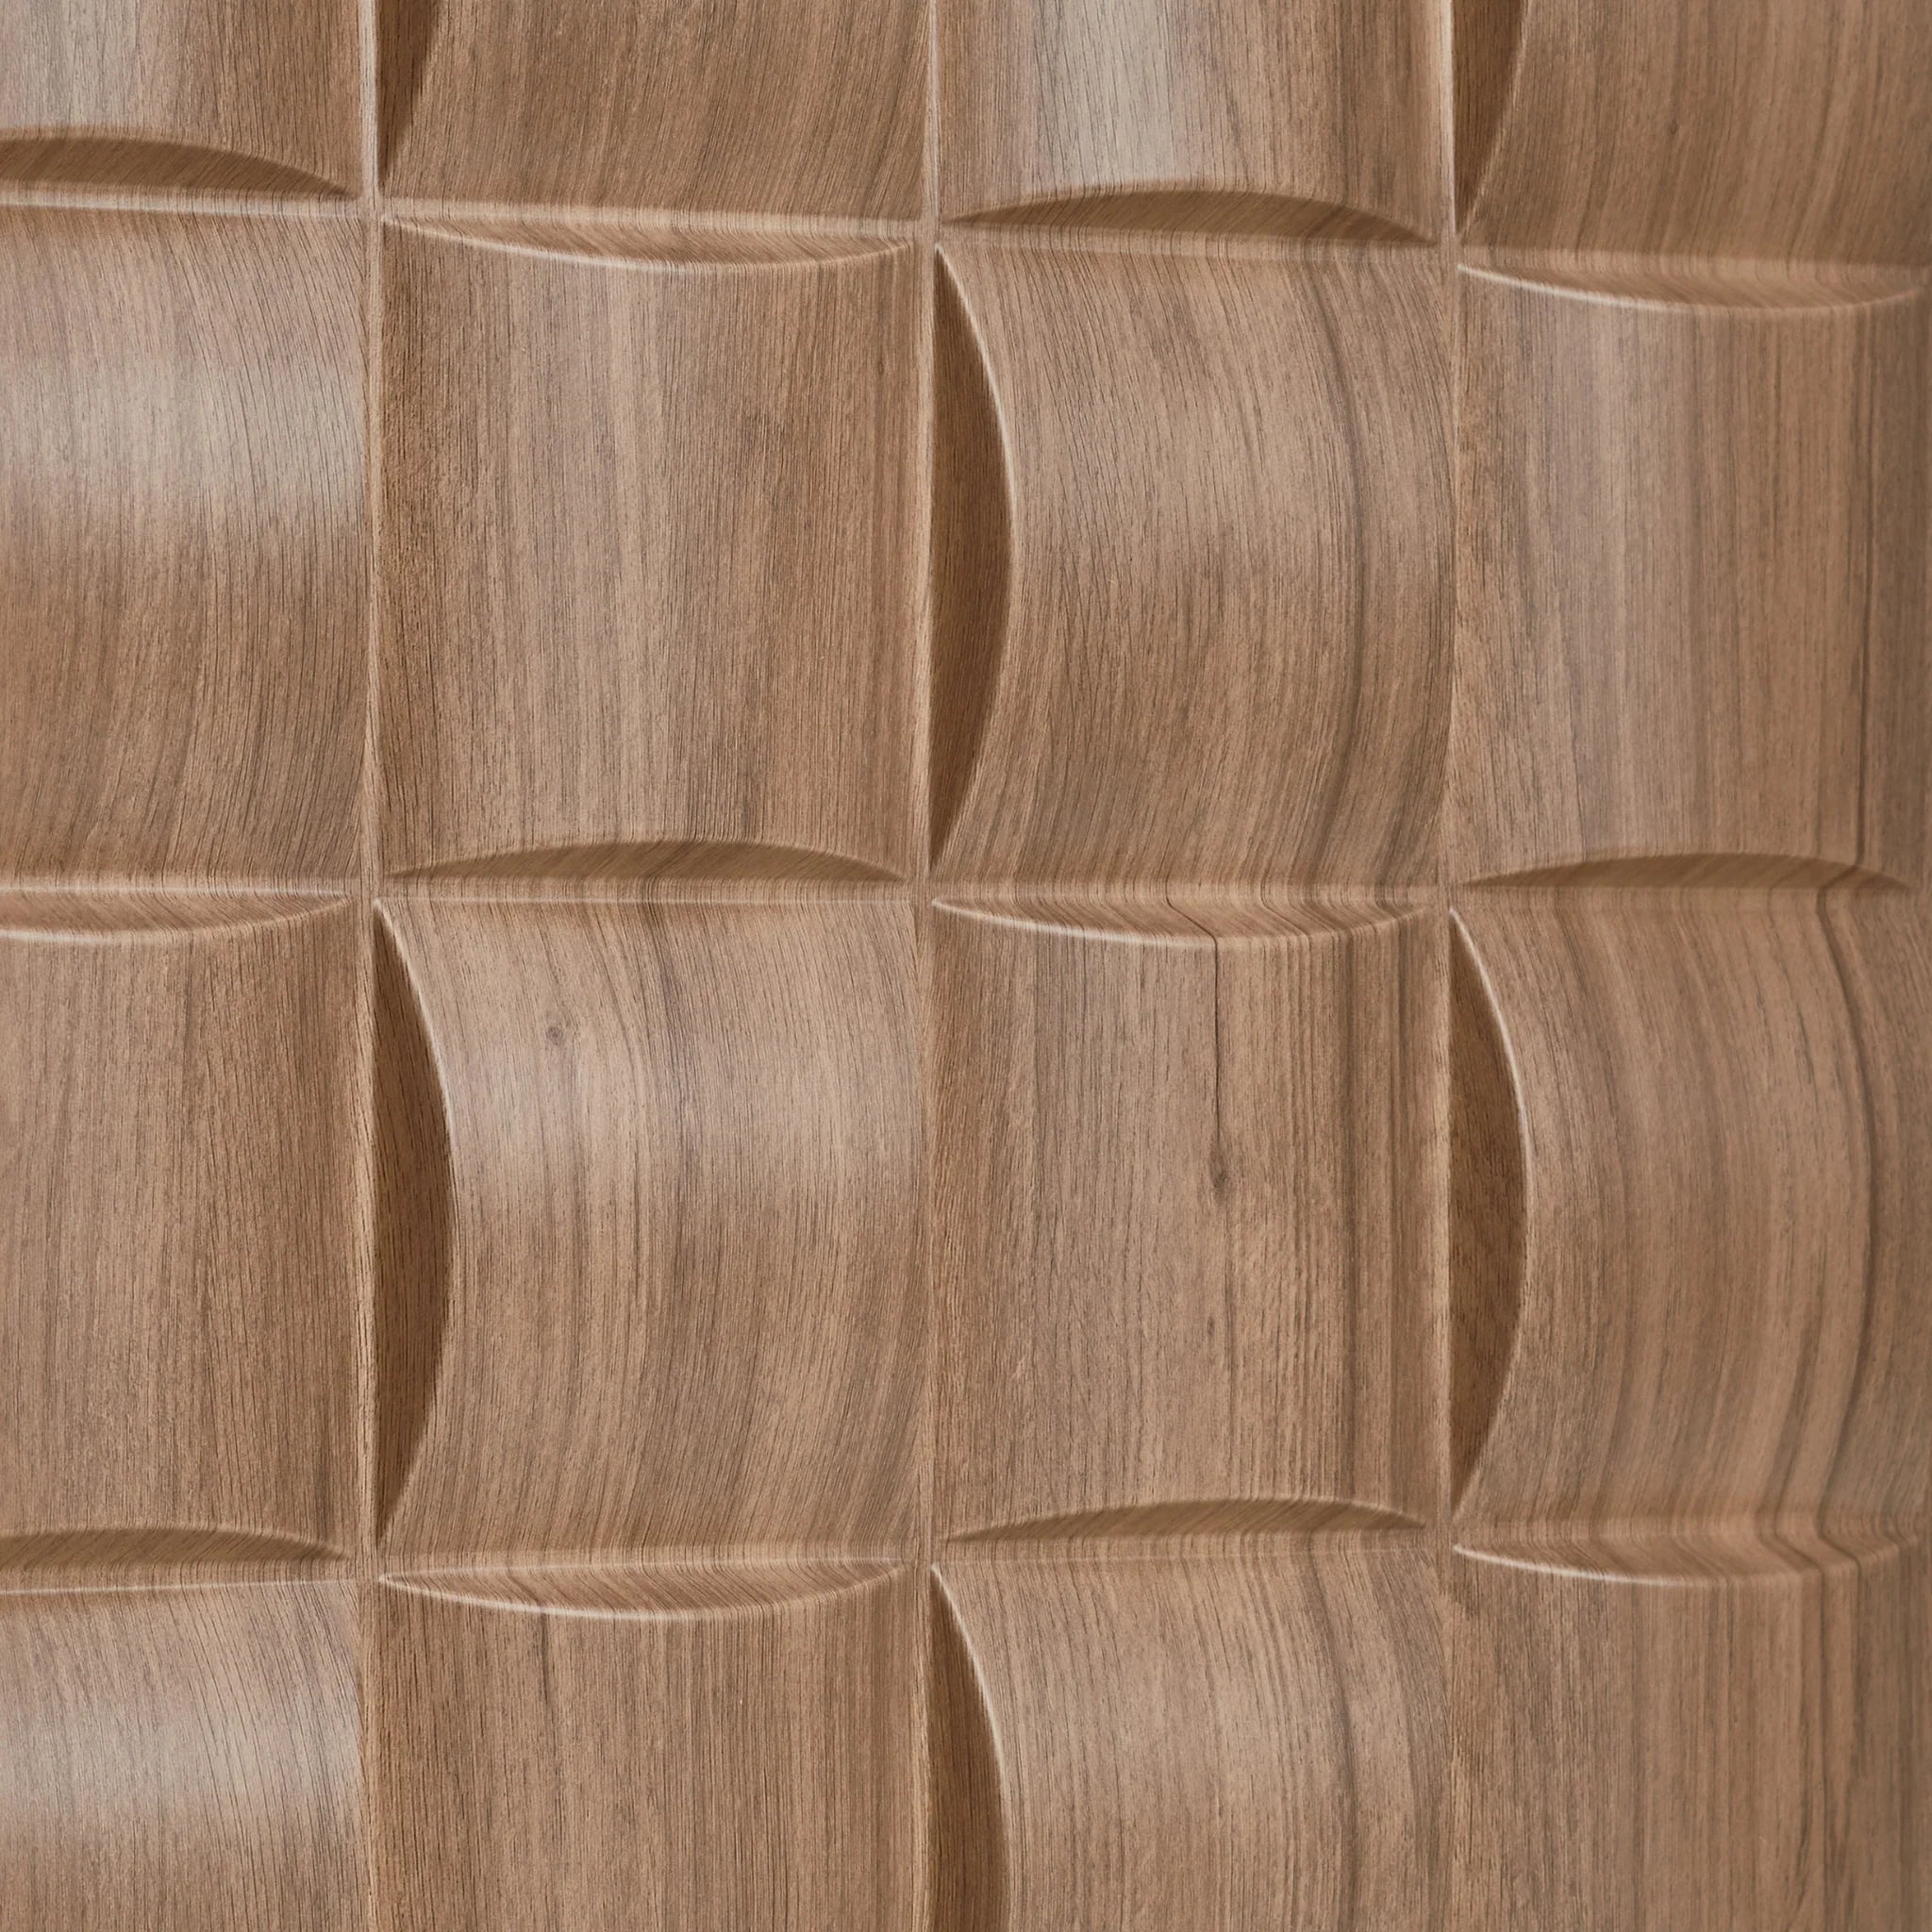 Close-up of wooden PVC wall panel with curved square design